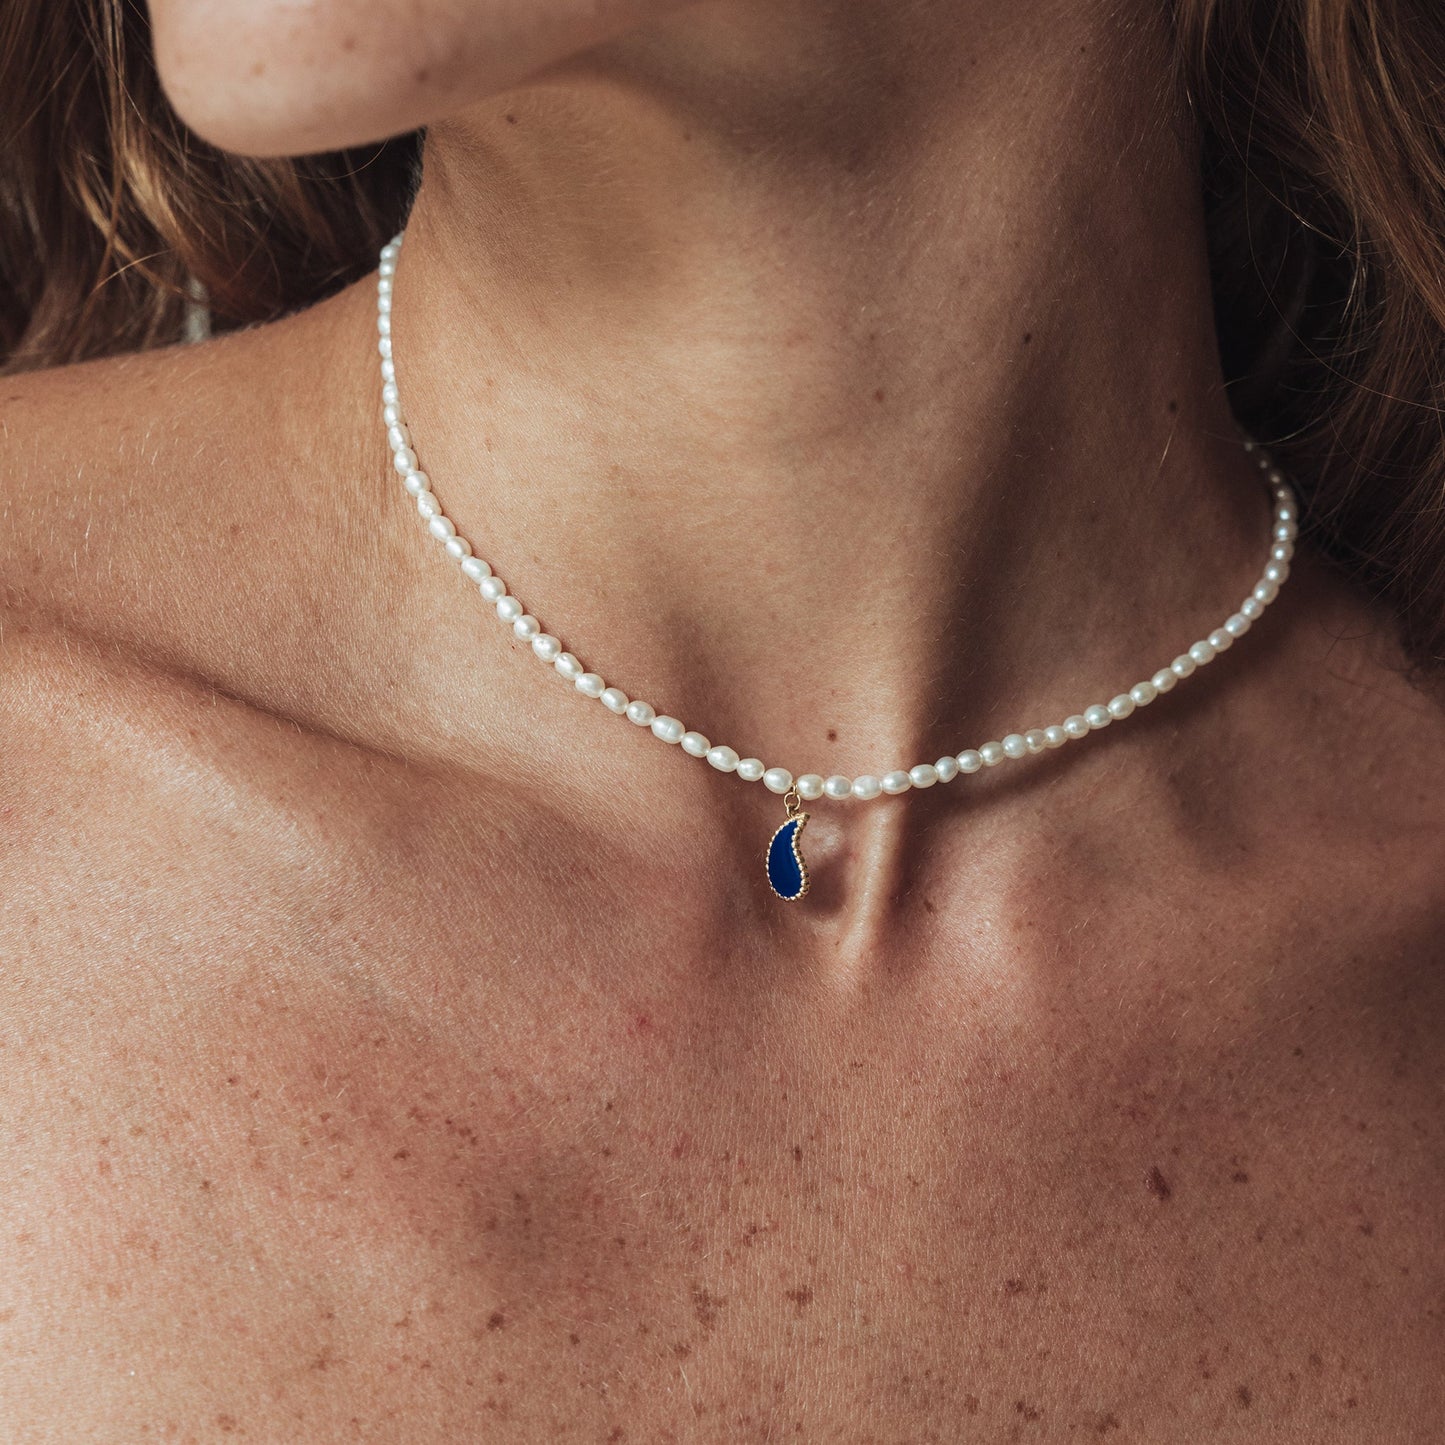 The Pearly teardrop necklace - Oria.jewelry